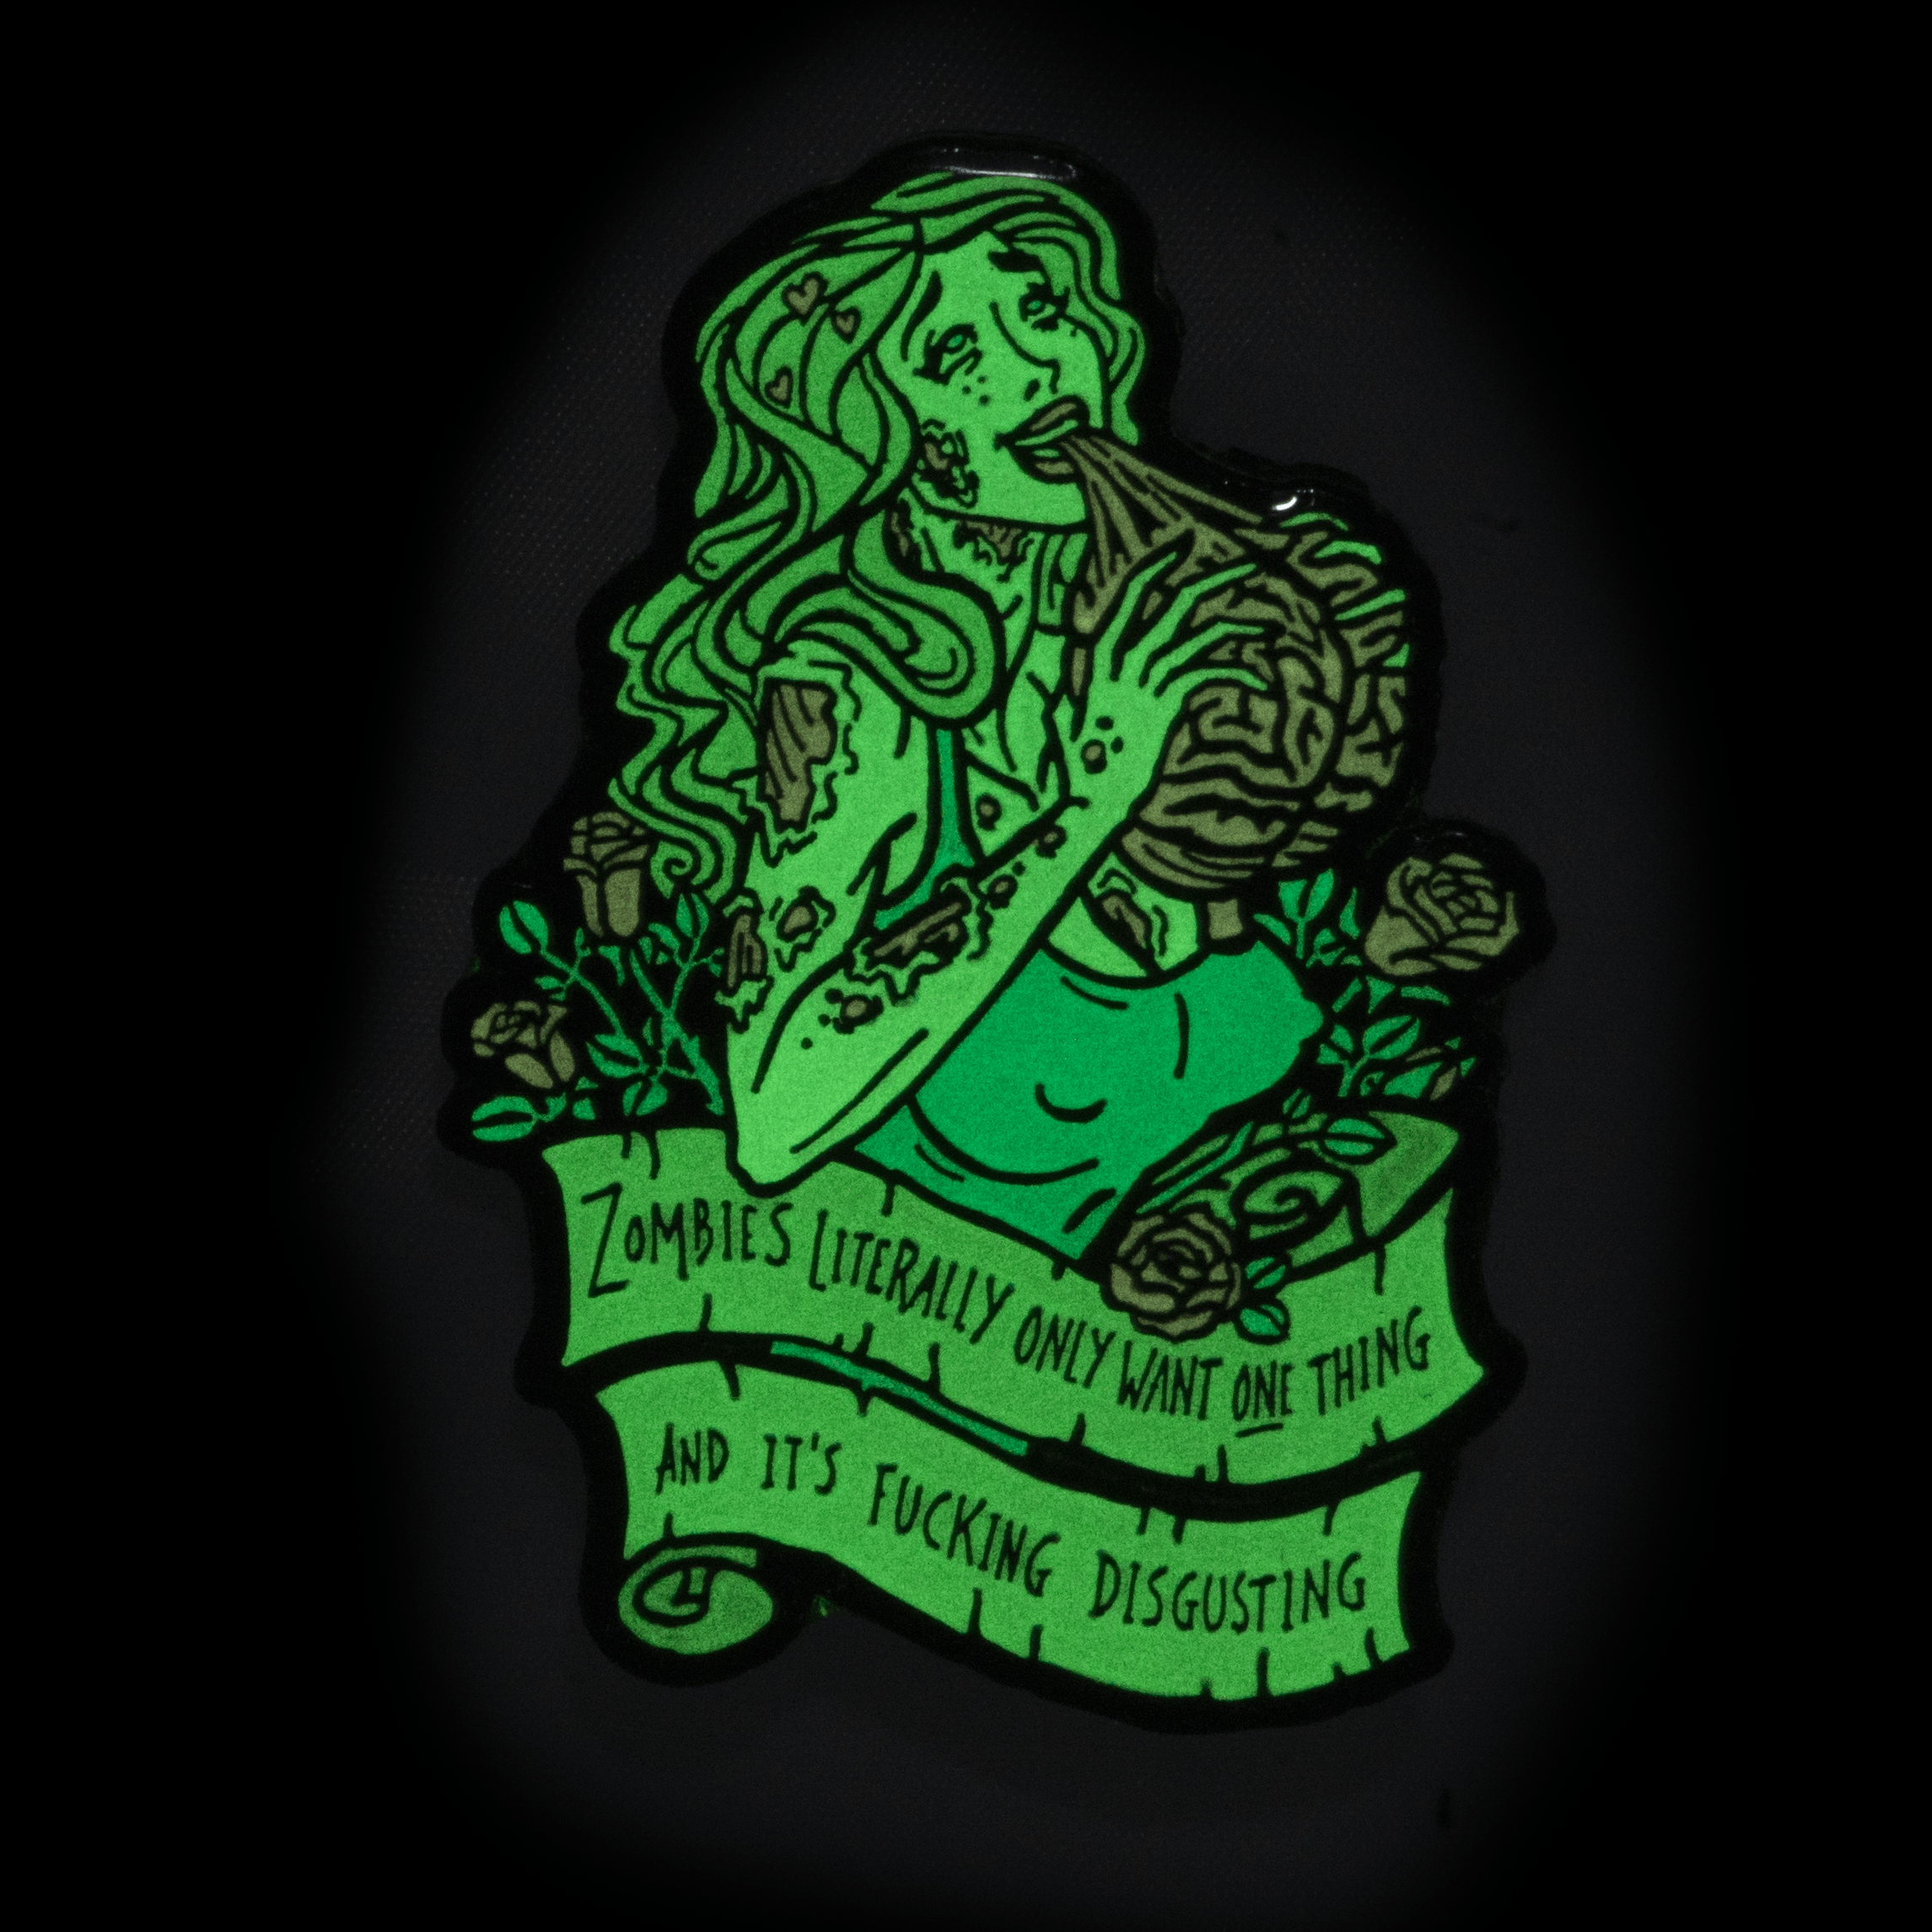 An enamel pin of a zombie woman eating a brain. An er below her says "Zombies literally only want one thing and it's fucking disgusting". The pin is glowing green in the dark.